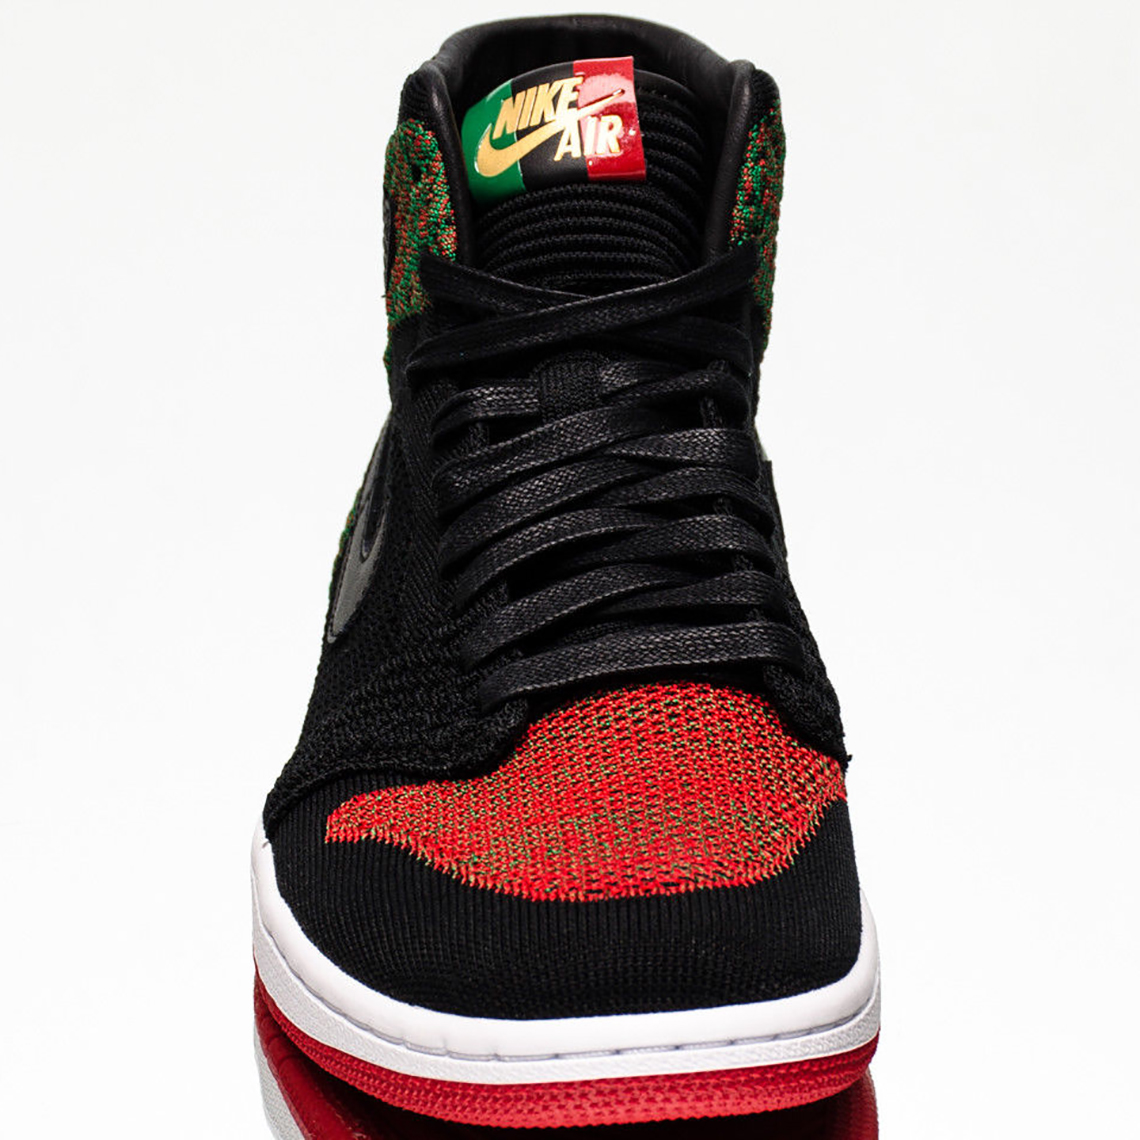 Él mismo Interpersonal polla Air Jordan 1 Flyknit "Black History Month" AA2426-026 Available Early |  SneakerNews.com